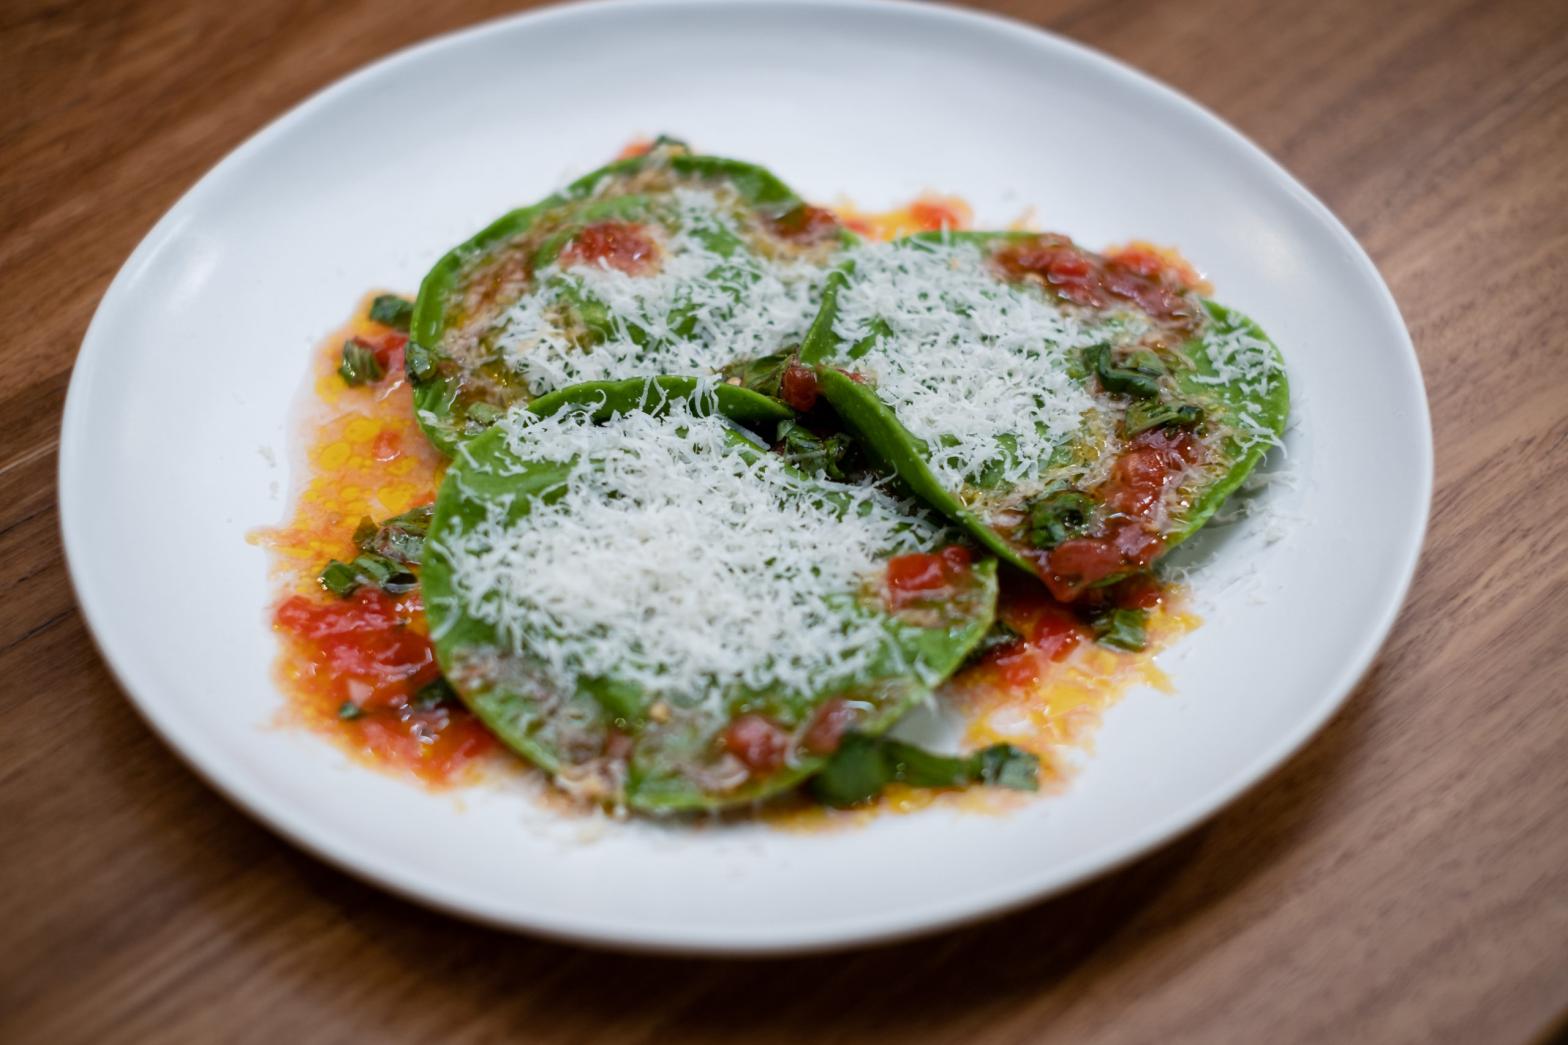 Tilly Ramsay's MasterChef recipe for spinach and egg ravioli